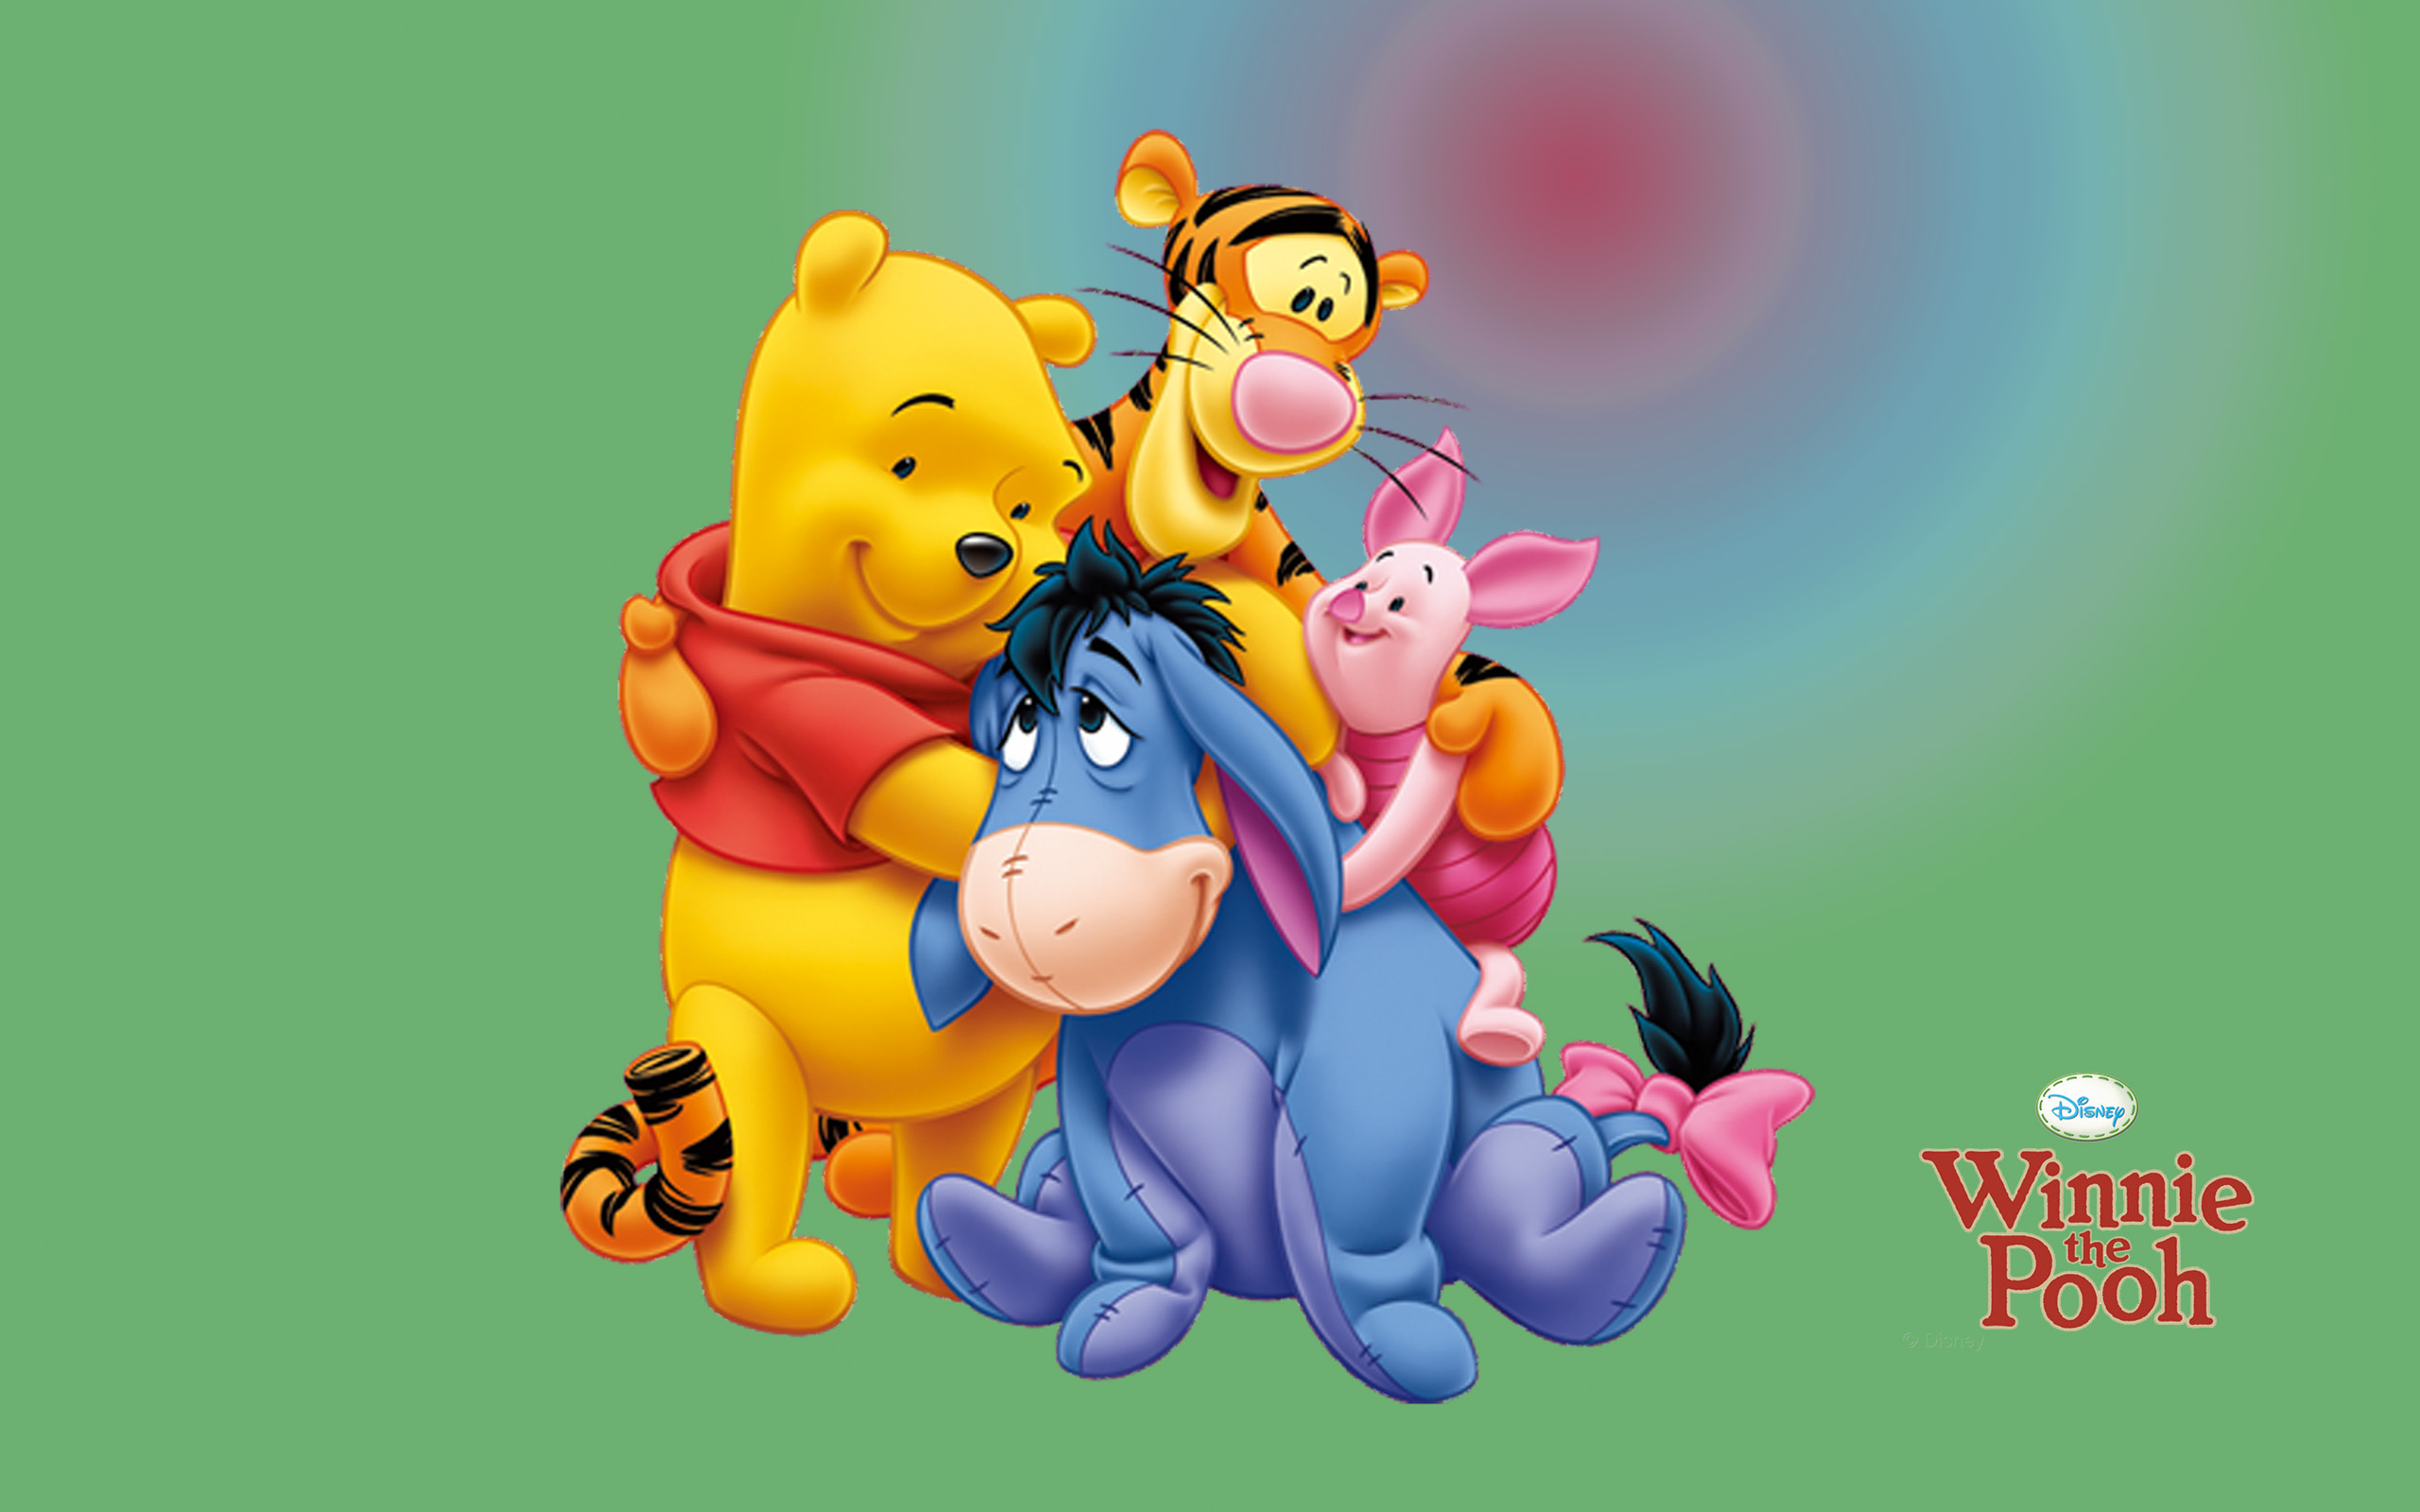 Winnie The Pooh And Friends Cartoon Image For Desktop Hd ...